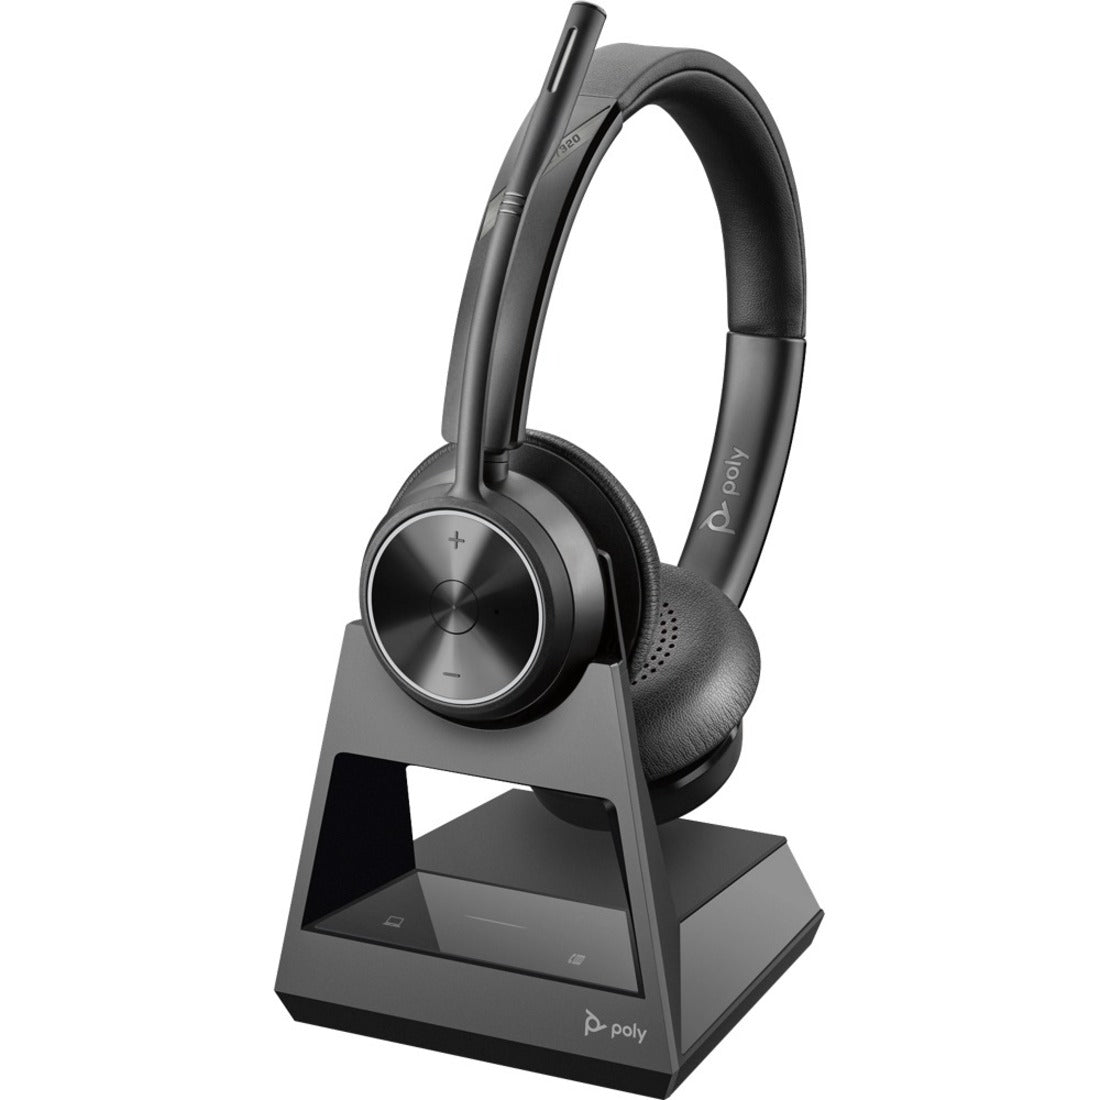 Poly 214777-01 Savi 7320 Office, S7320 CD, Stereo Headset, Wireless DECT 6.0, Noise Canceling